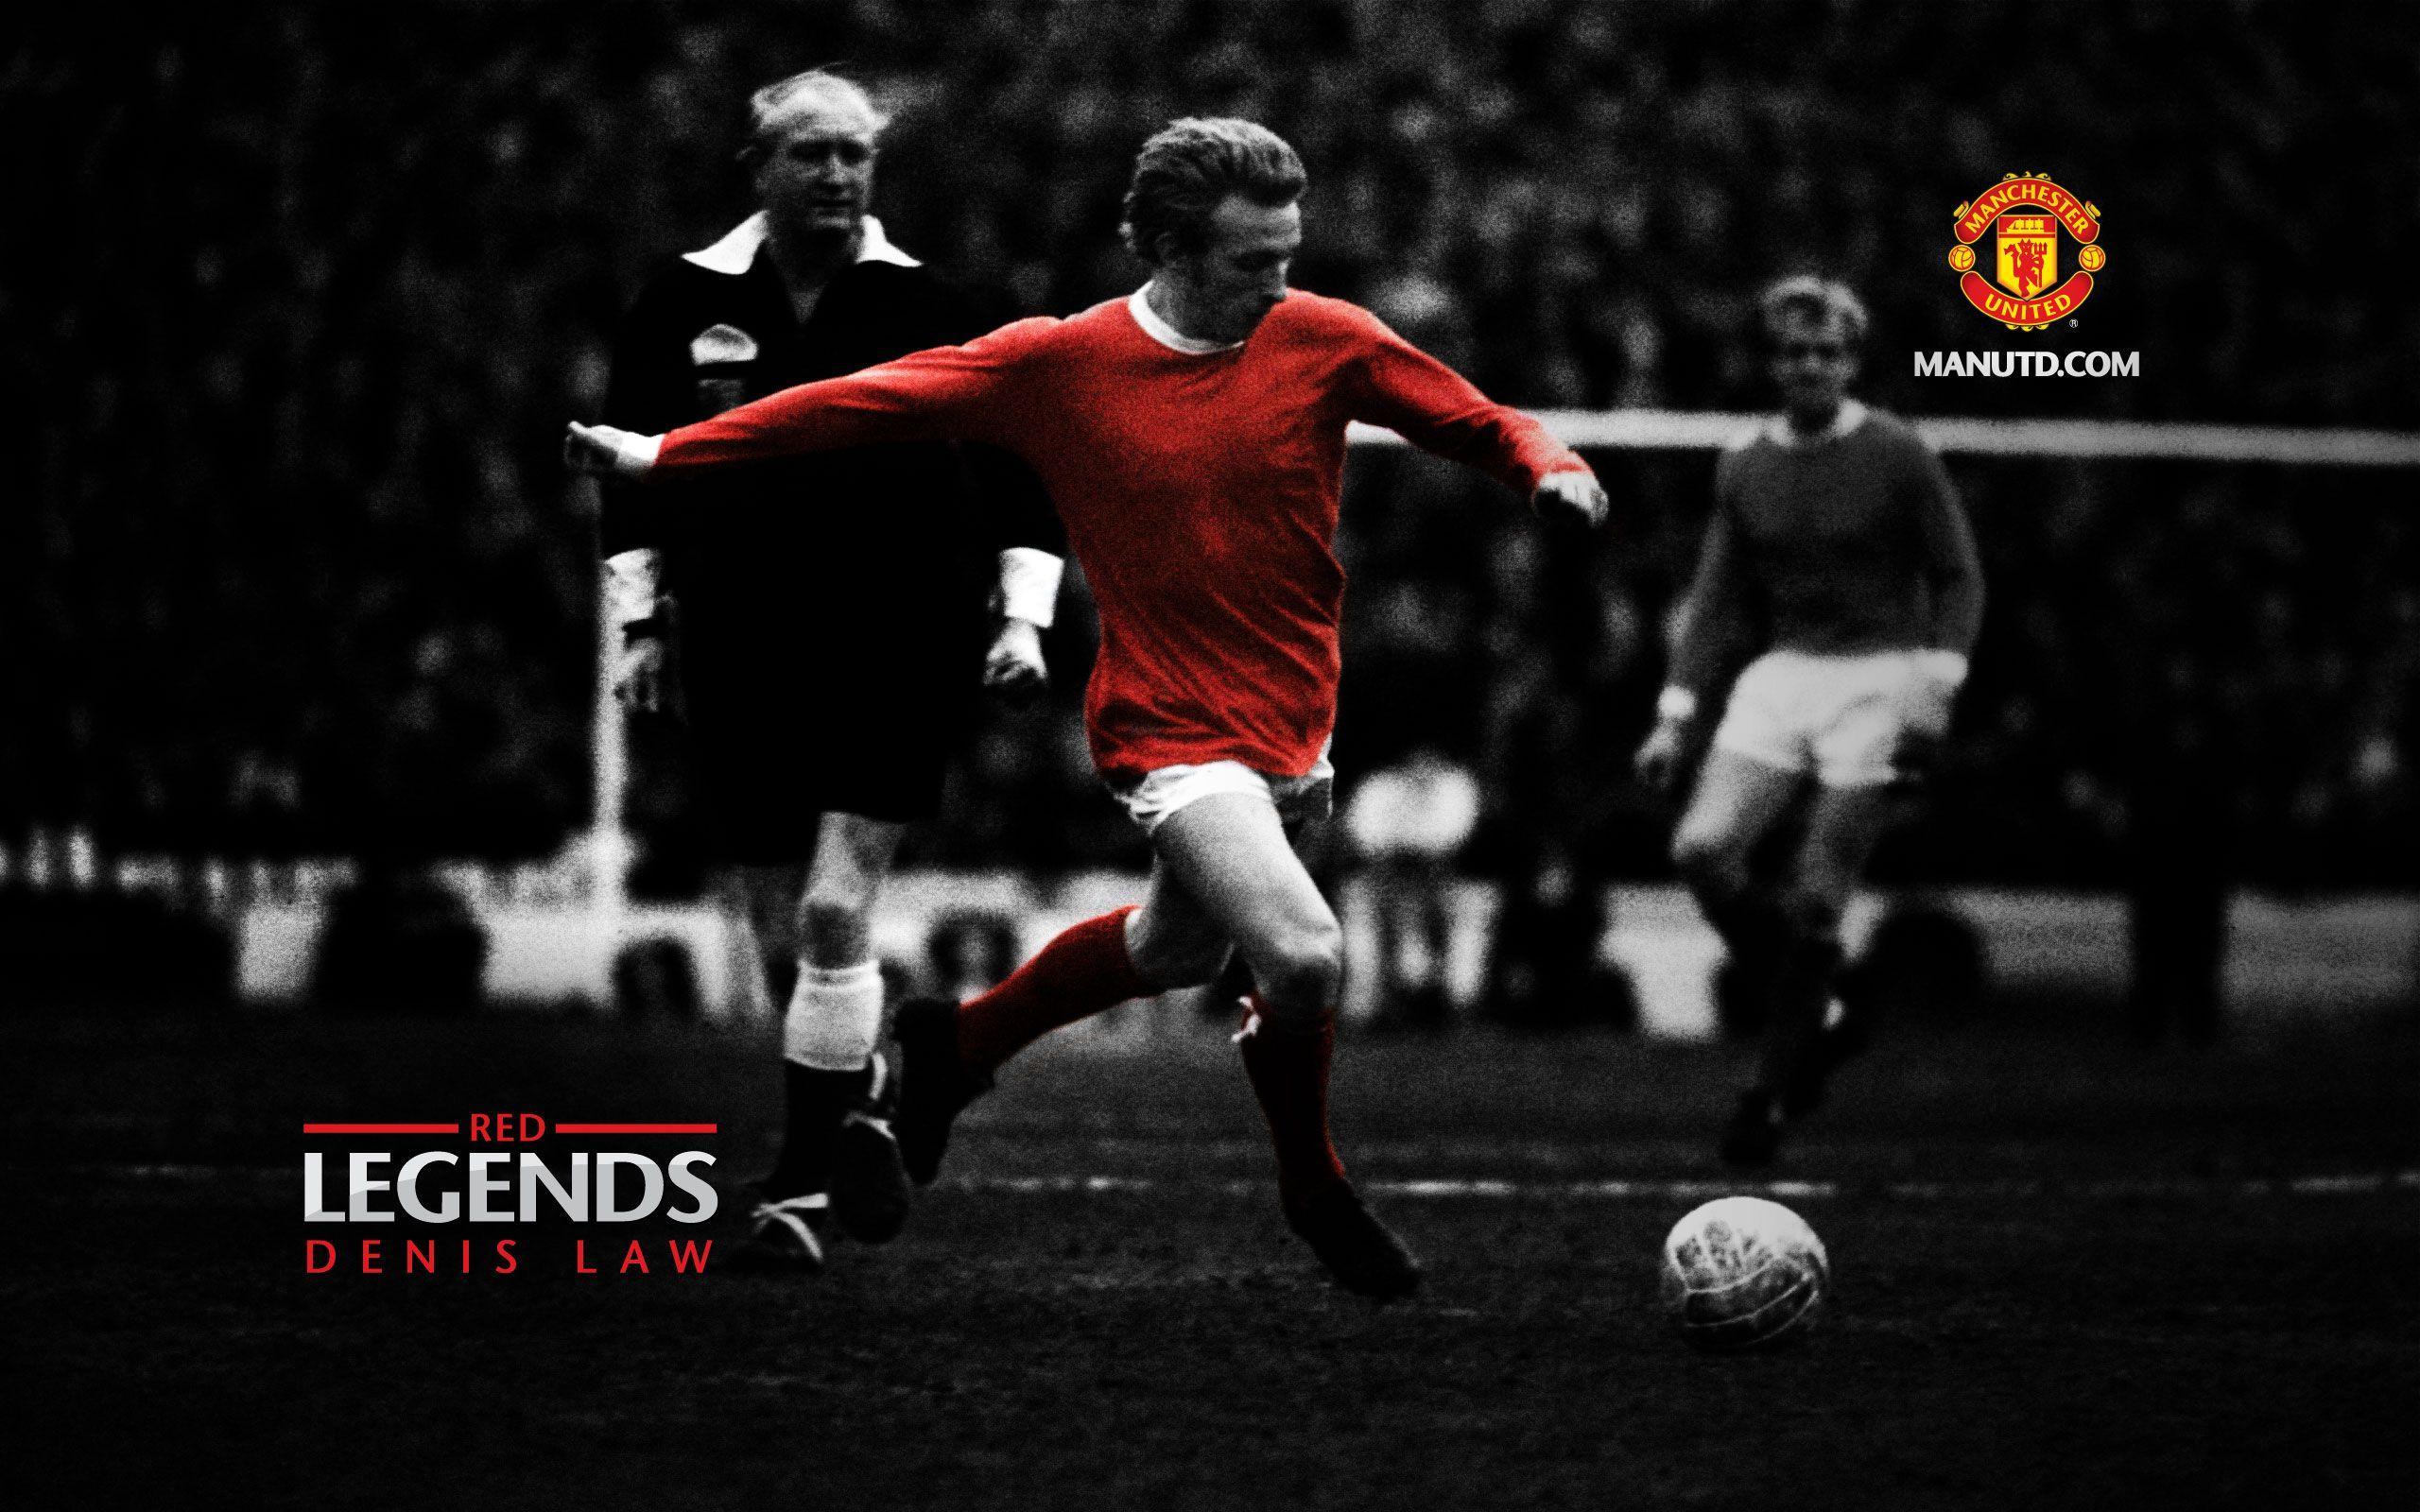 EXCLUSIVE WALLPAPER. MANCHESTER UNITED LEGEND. #united family